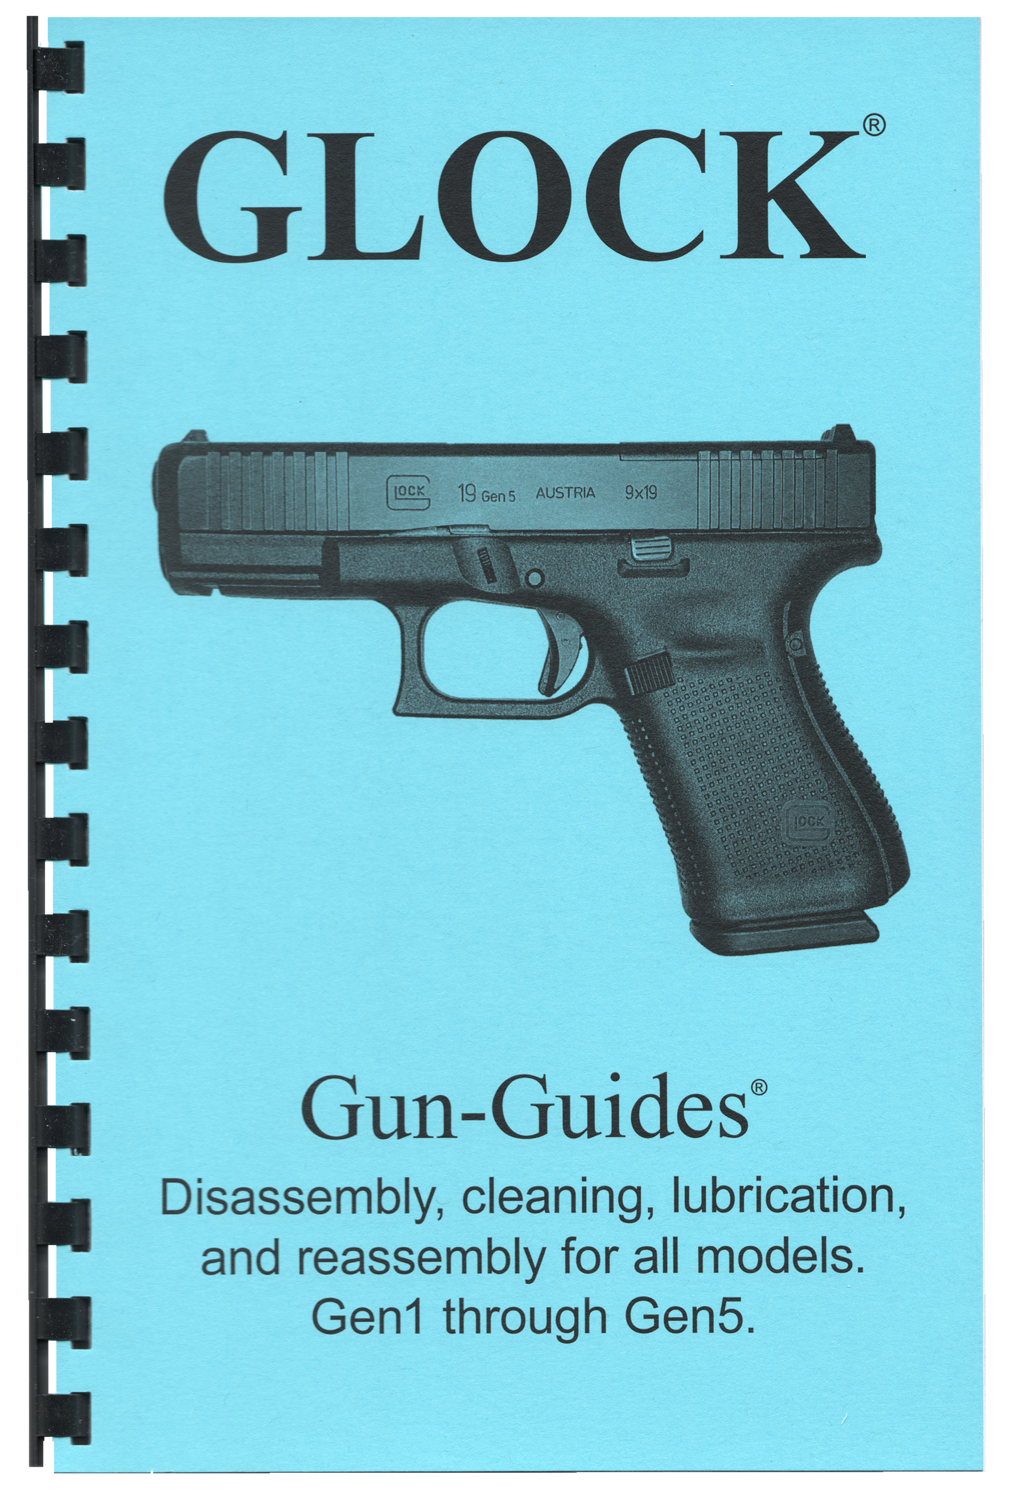 Glock® Pistols Gun-Guides® Disassembly, cleaning, lubrication and reassembly for all models. Gen1~Gen5